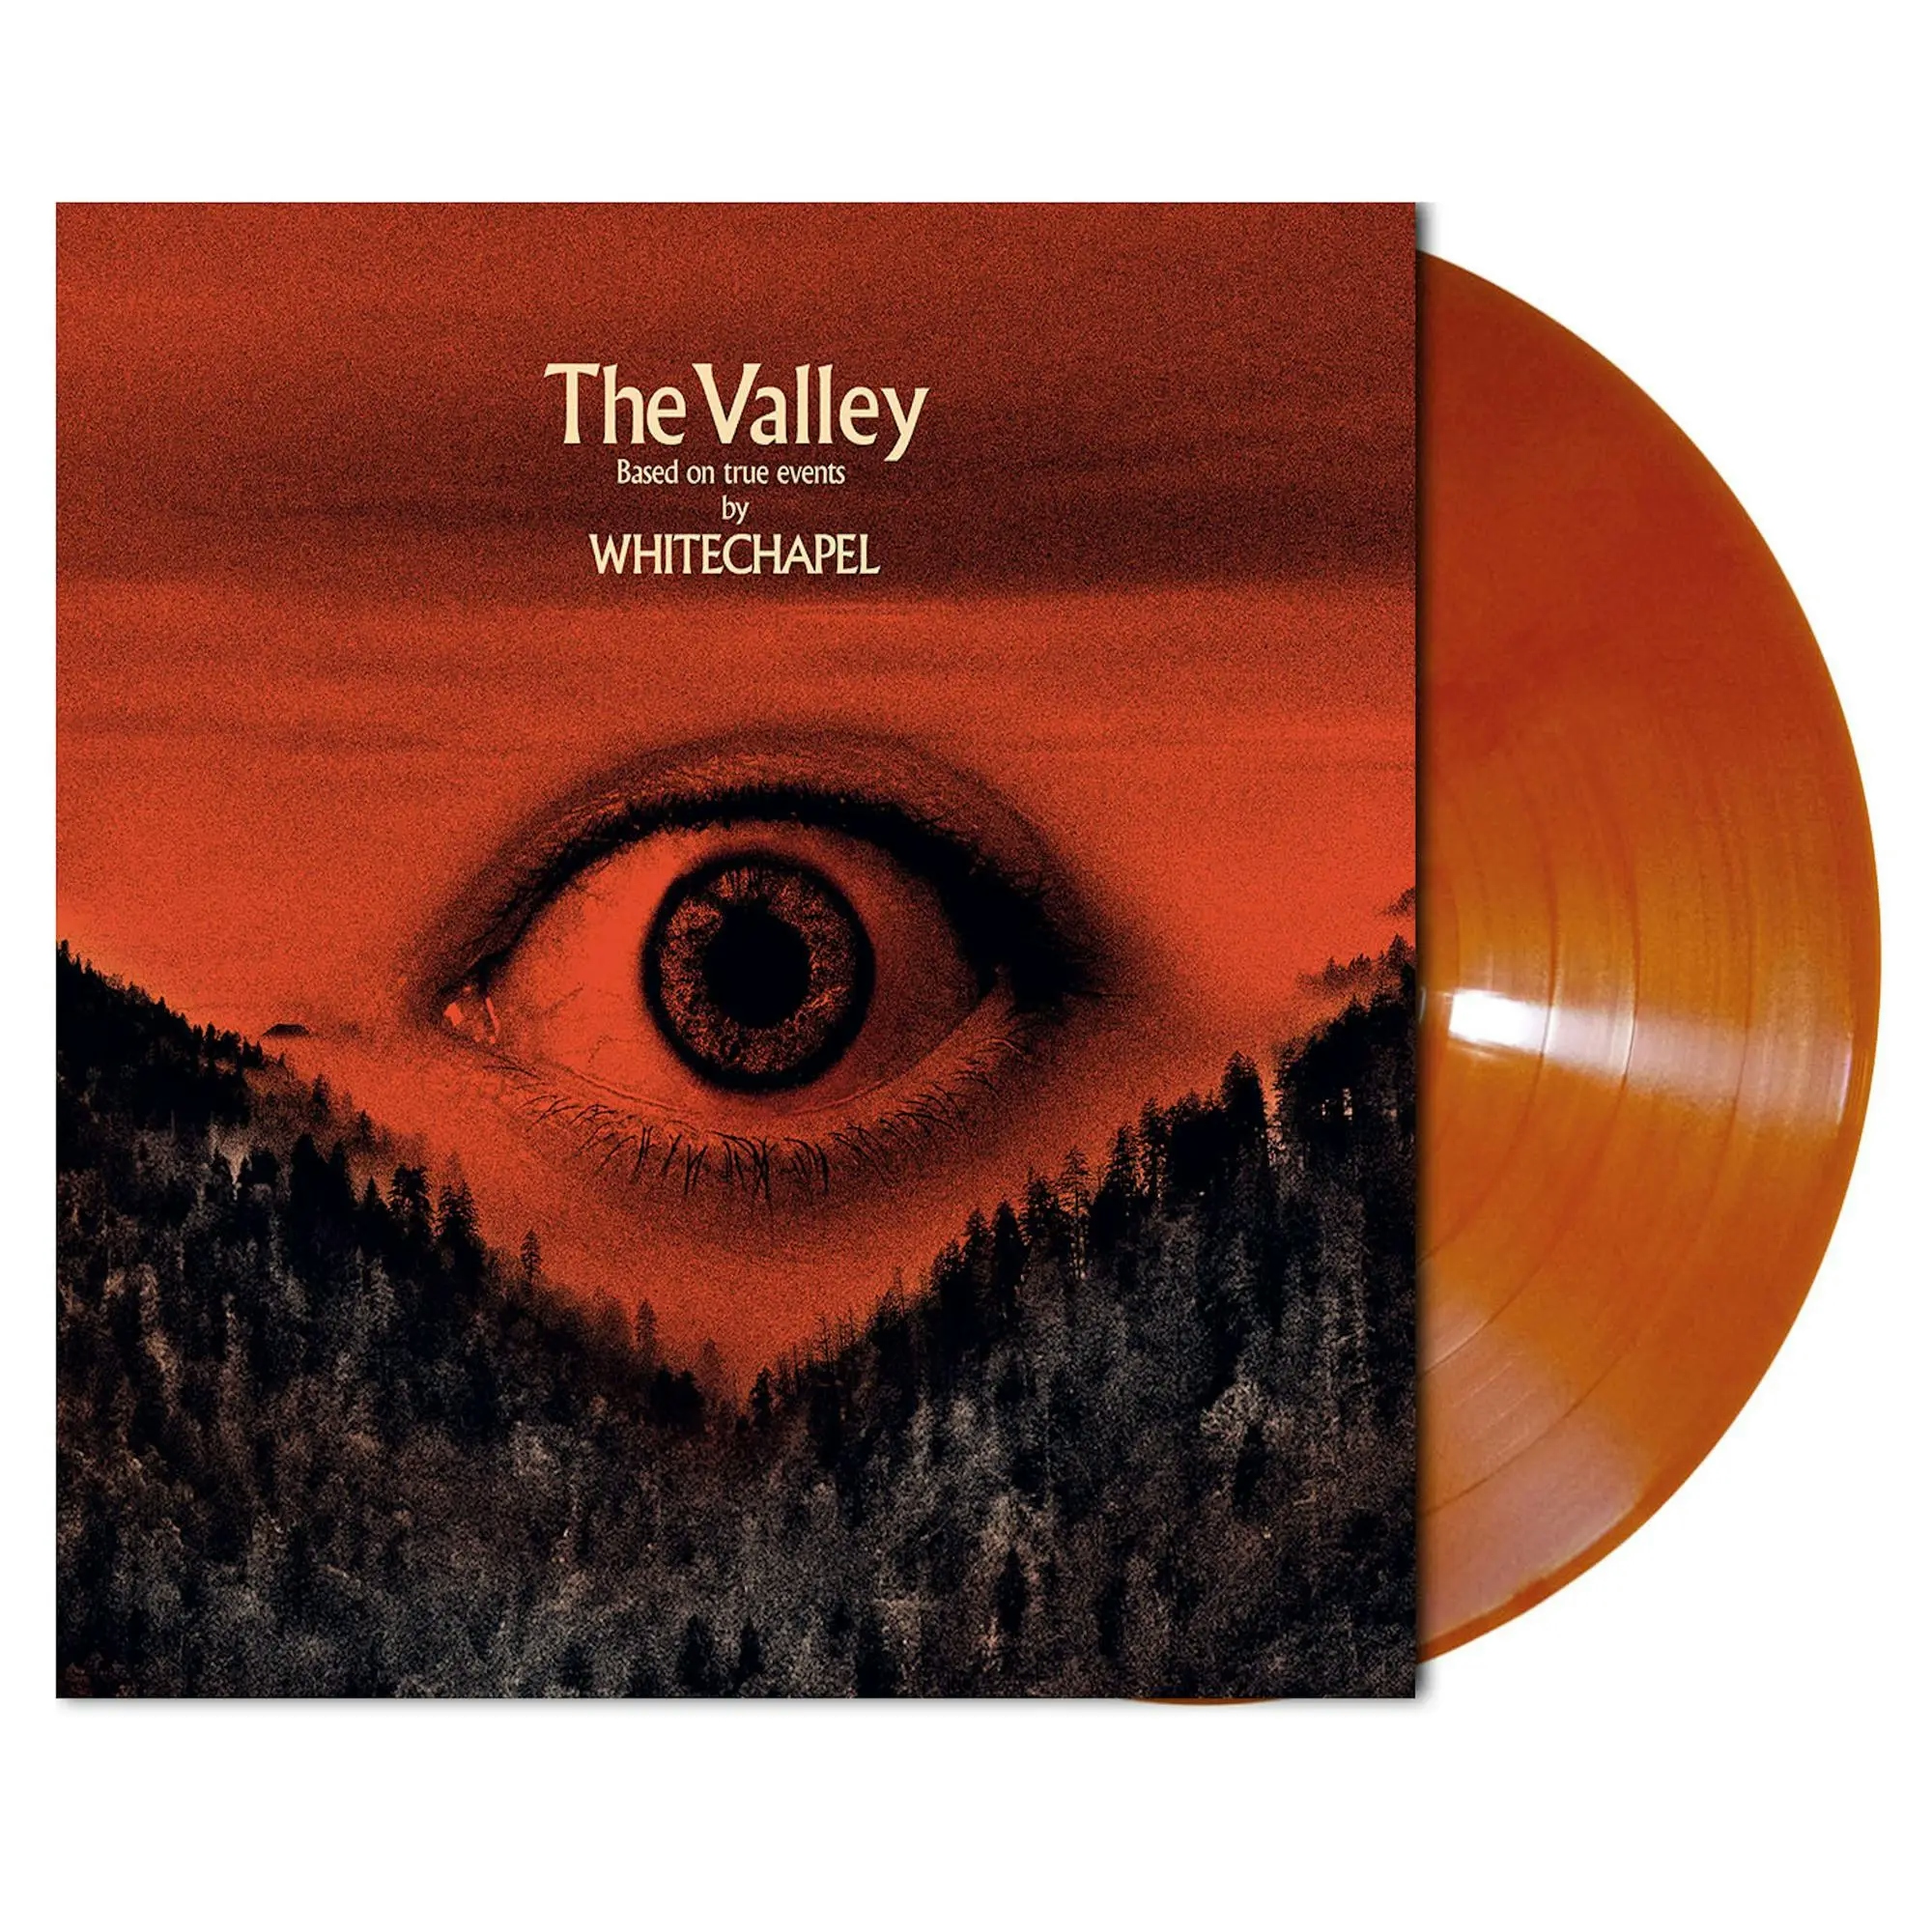 Album artwork for The Valley by Whitechapel